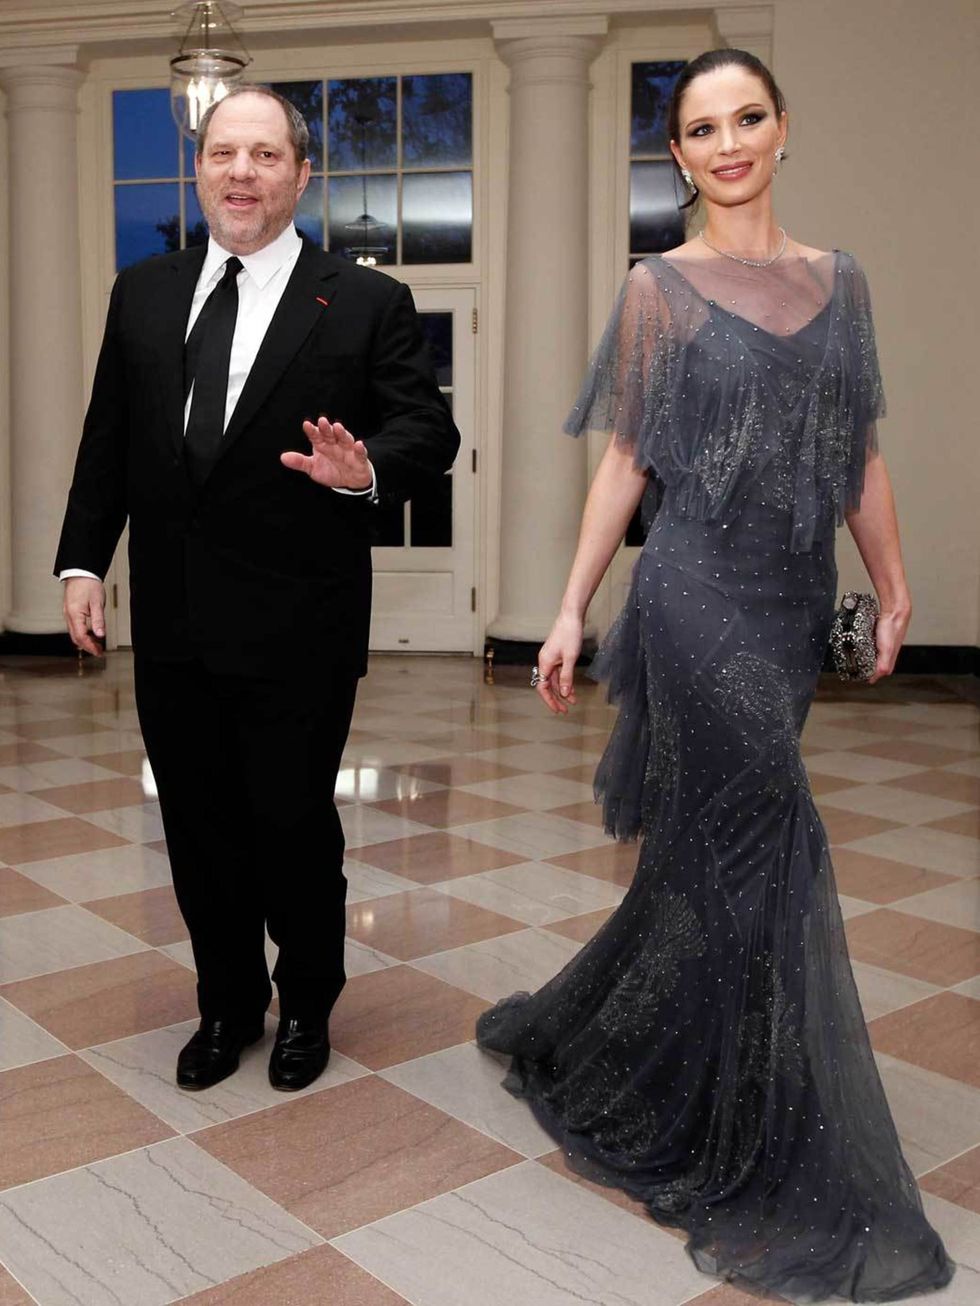 <p>Harvey Weinstein and Ms. Georgina Chapman arrive for the State dinner for the Prime Minister of Great Britain at the White House on March, 14, 2012 in Washington, DC.</p>